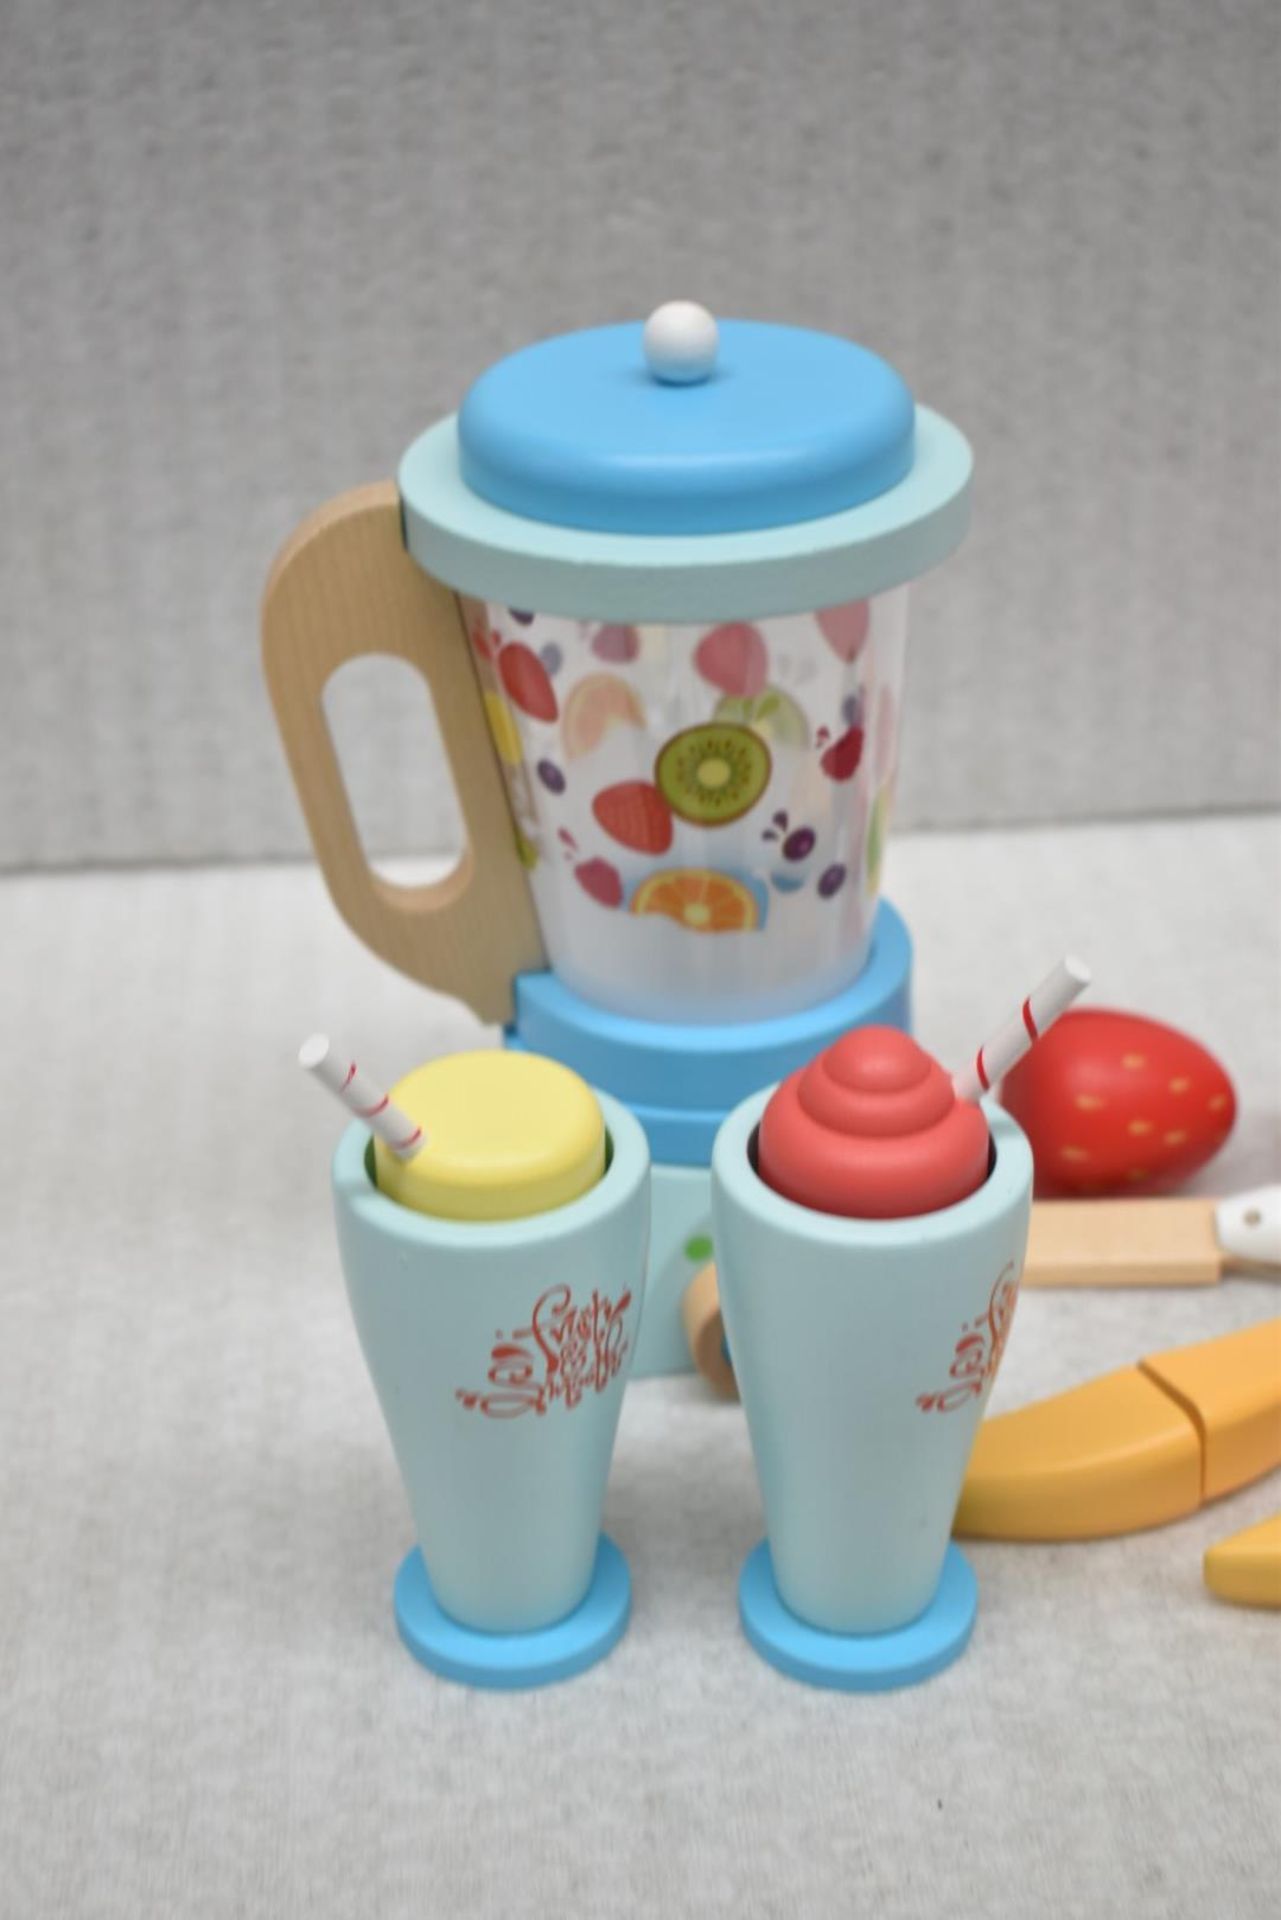 1 x LE TOY VAN Wooden Toy Blender Fruit Smooth Play Set - Unused Boxed Stock - Ref: HAS2317/WH2/ - Image 3 of 4